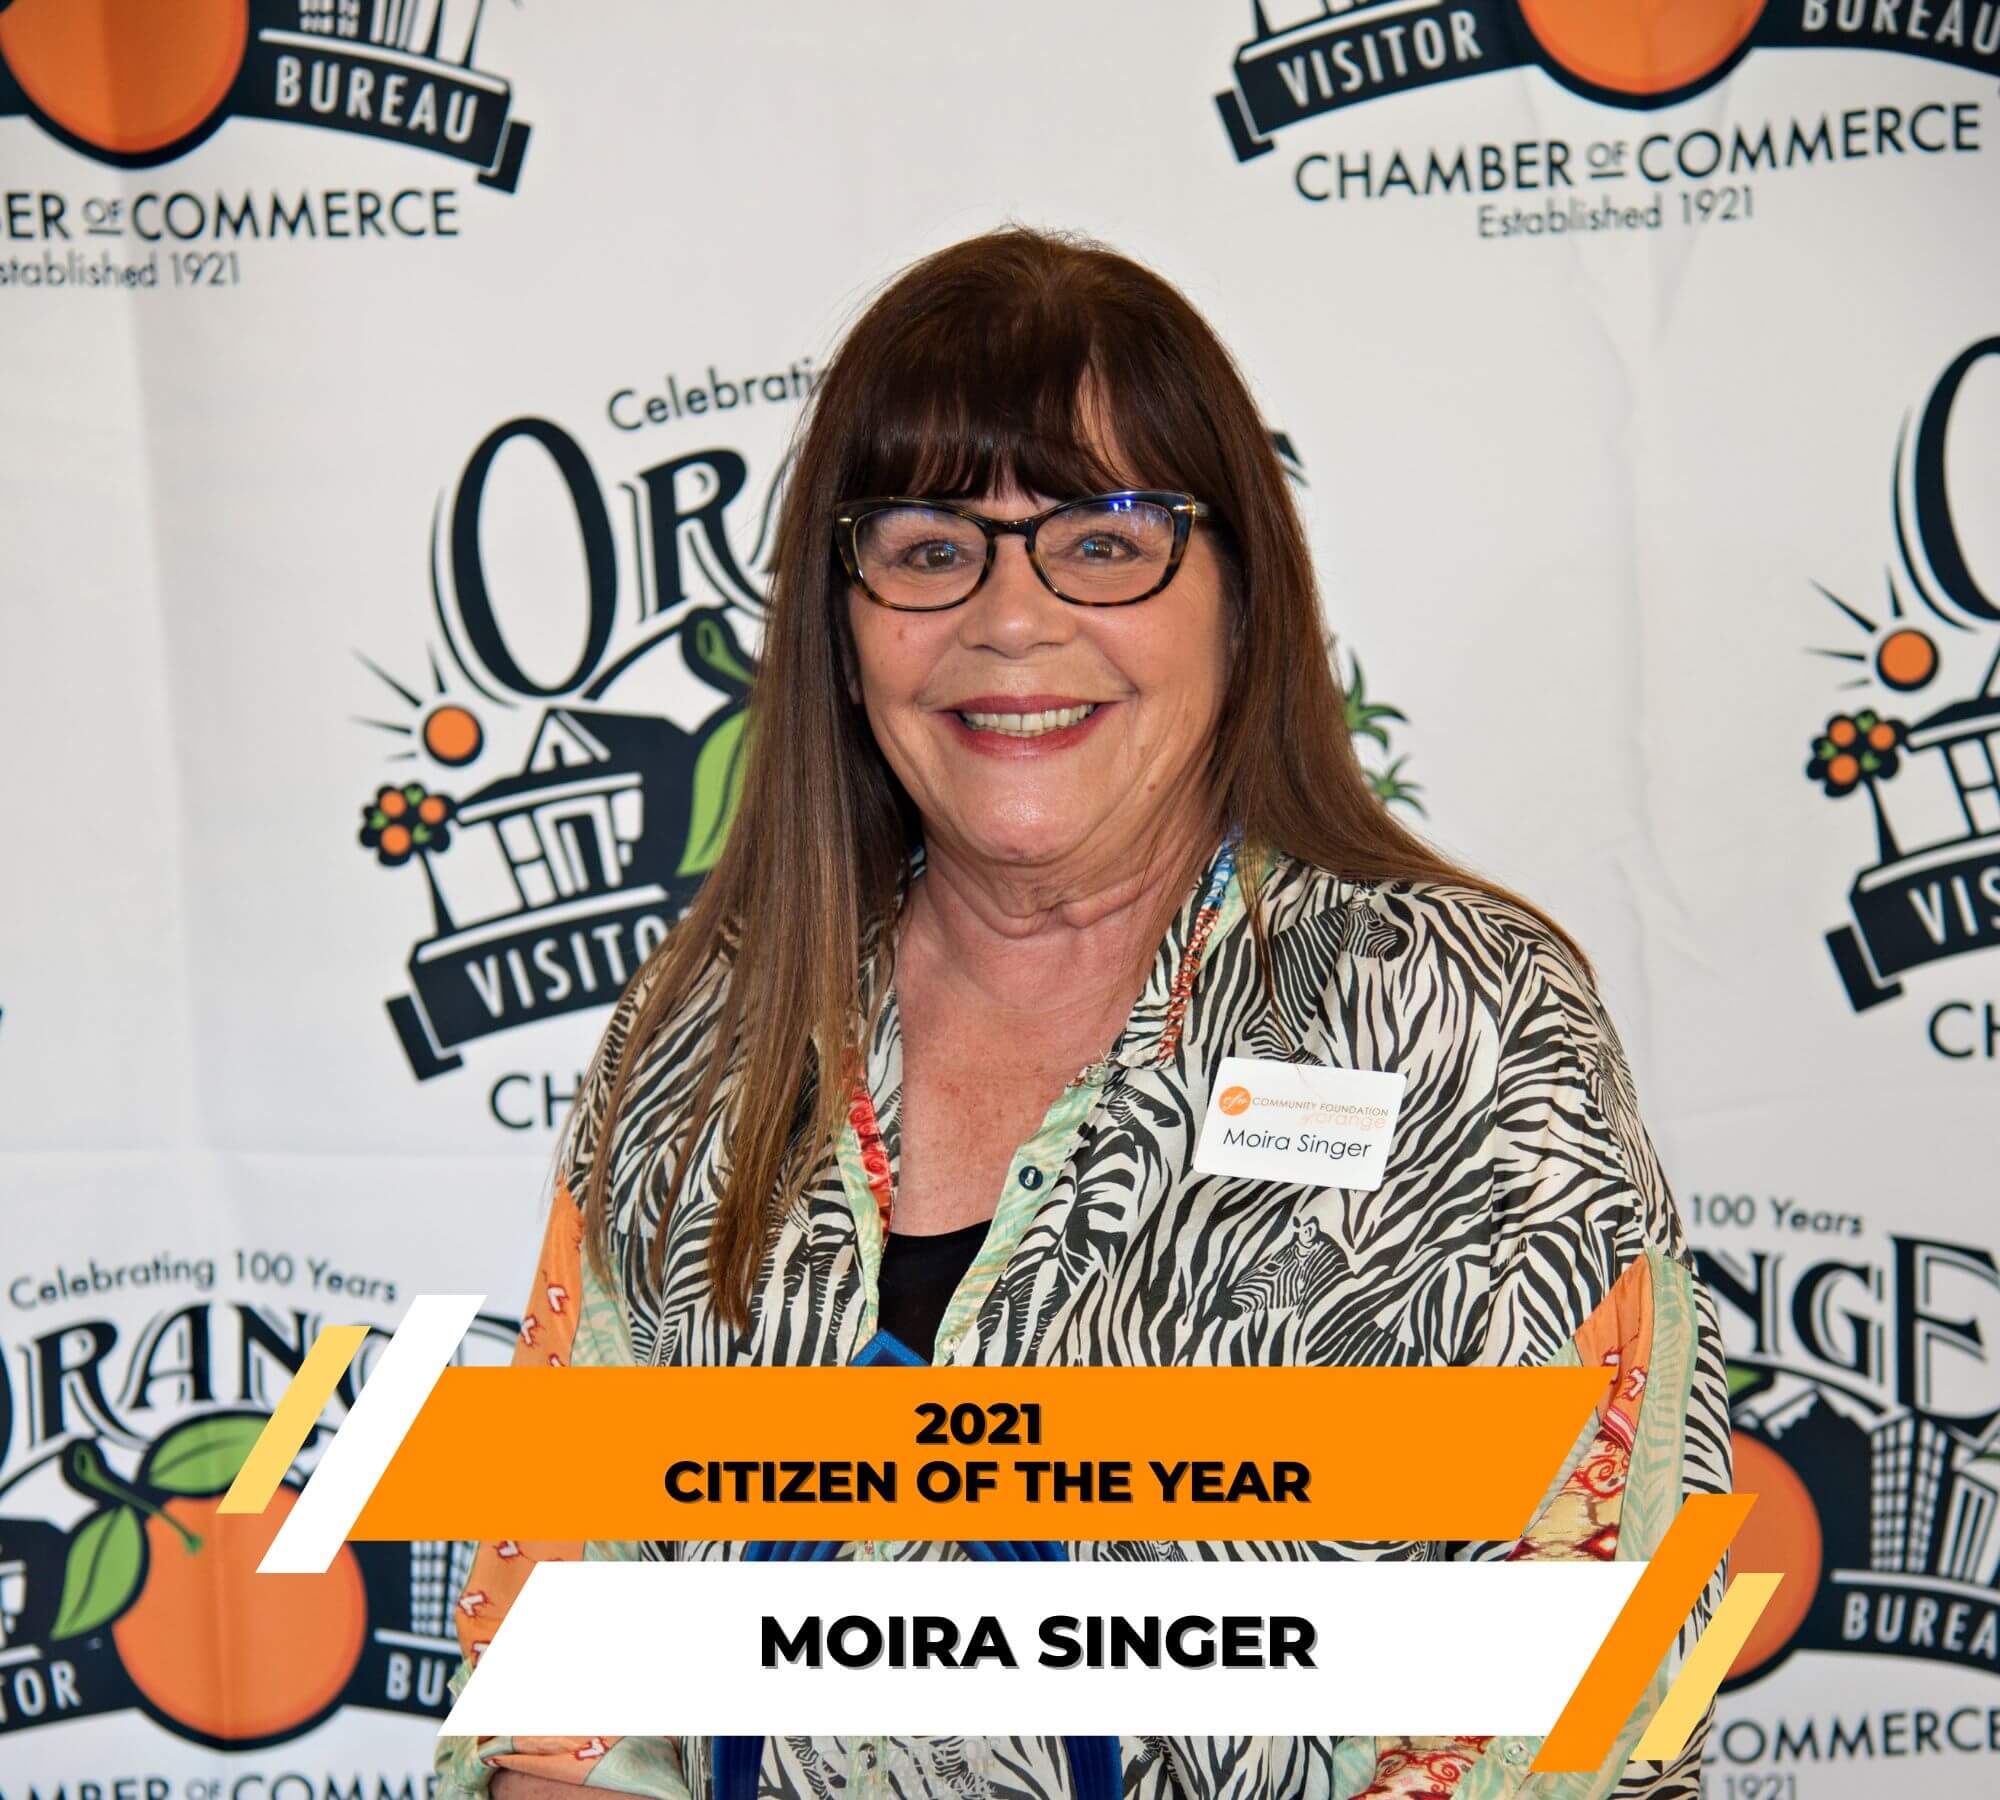 2022 State of the City 2021 Citizen of the Year Moira Singer